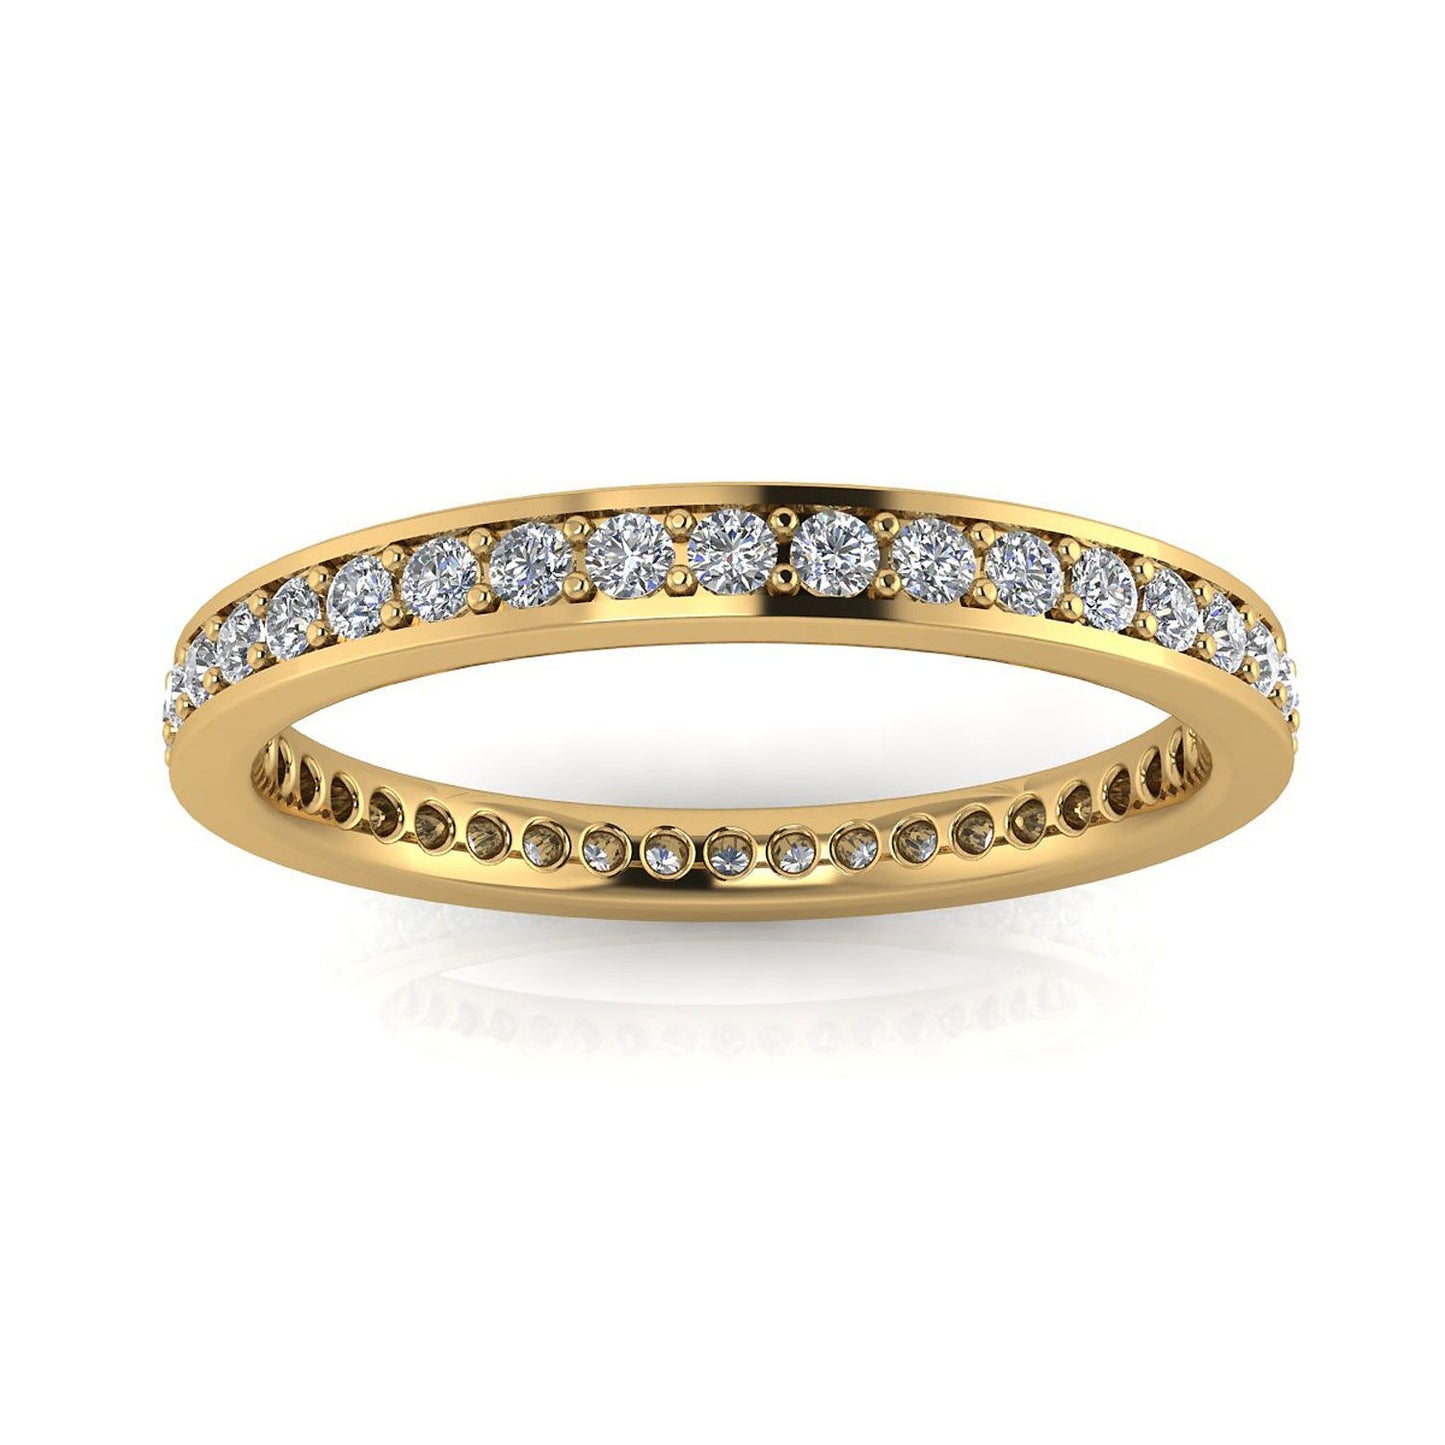 Round Brilliant Cut Diamond Channel Pave Set Eternity Ring In 18k Yellow Gold  (1.02ct. Tw.) Ring Size 9